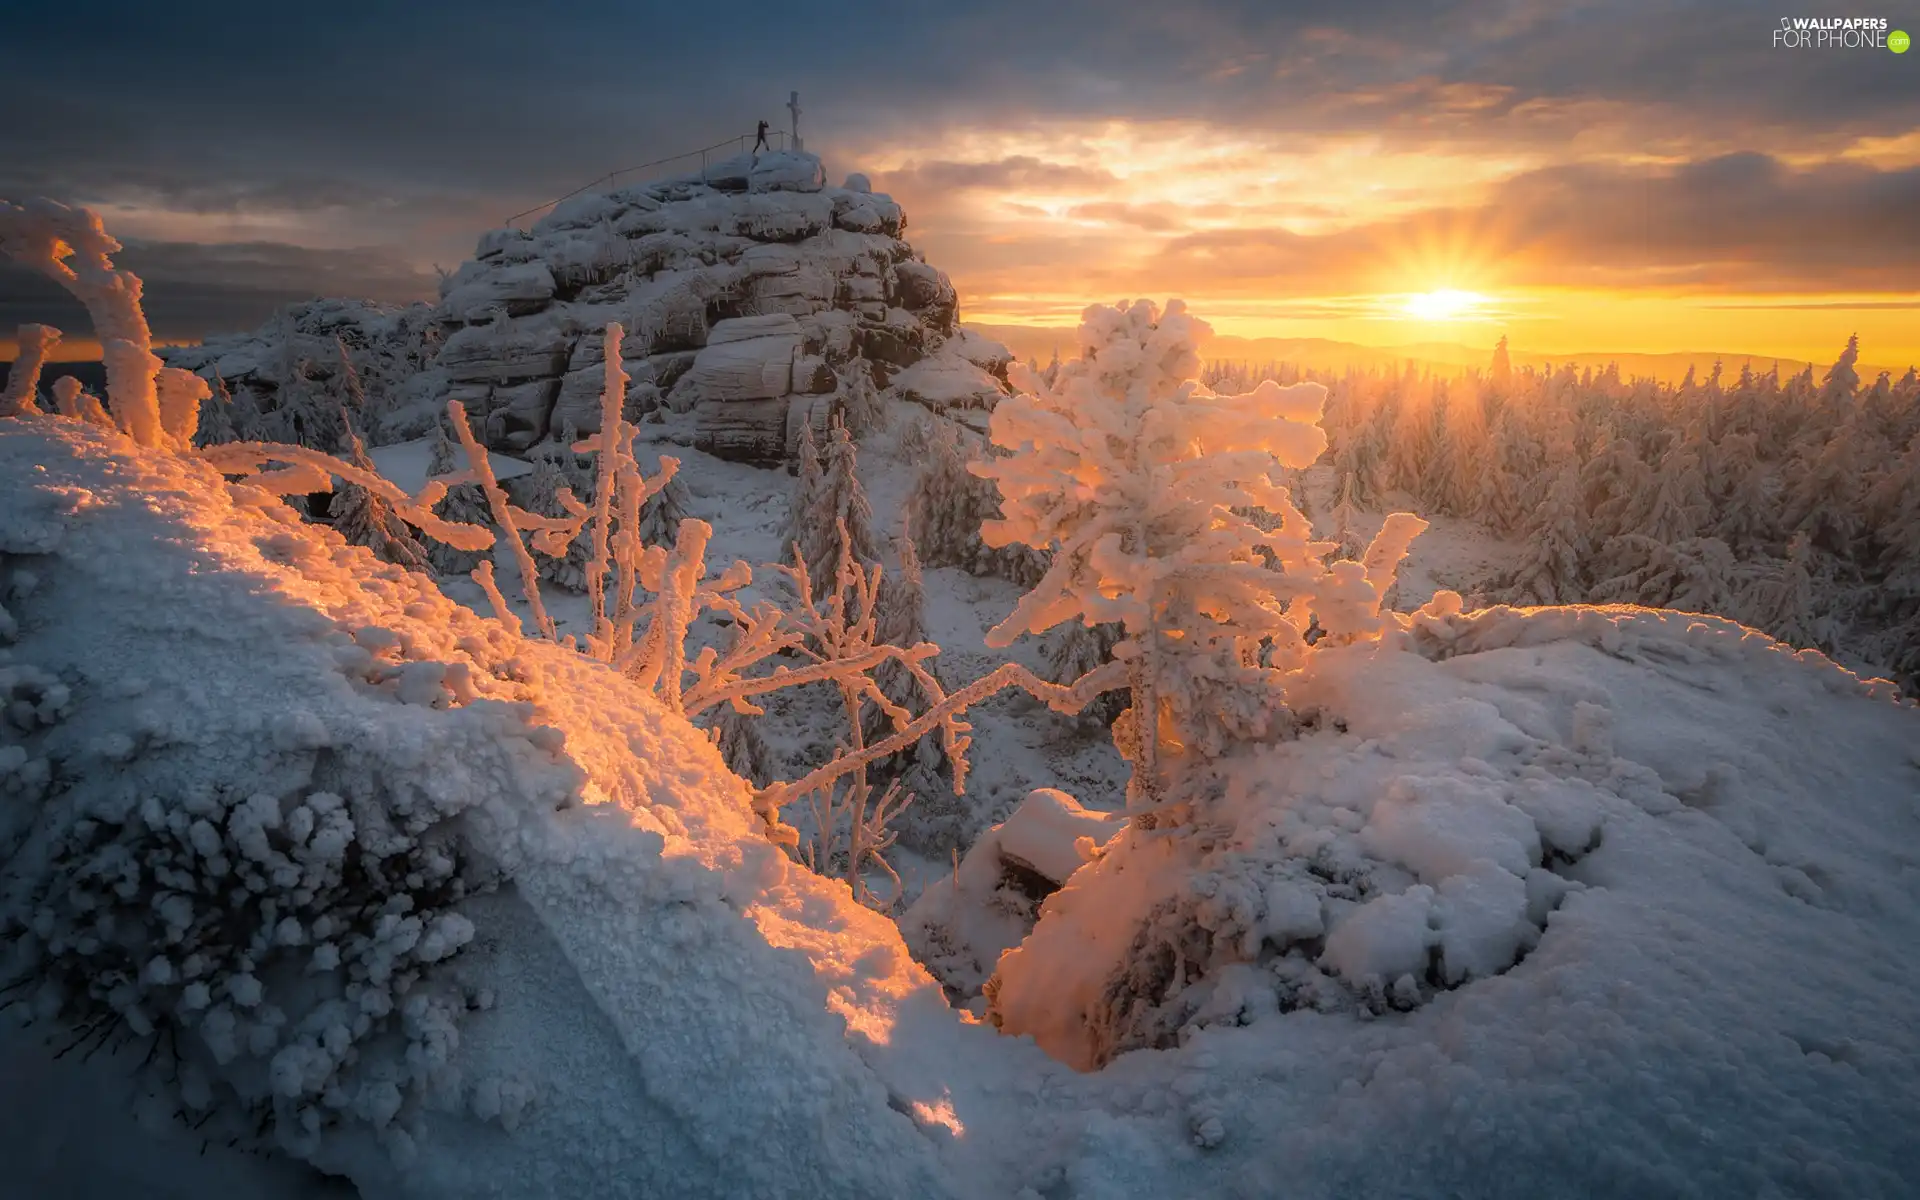 Mountains, winter, forest, Snowy, Sunrise, clouds, viewes, Rocks, trees